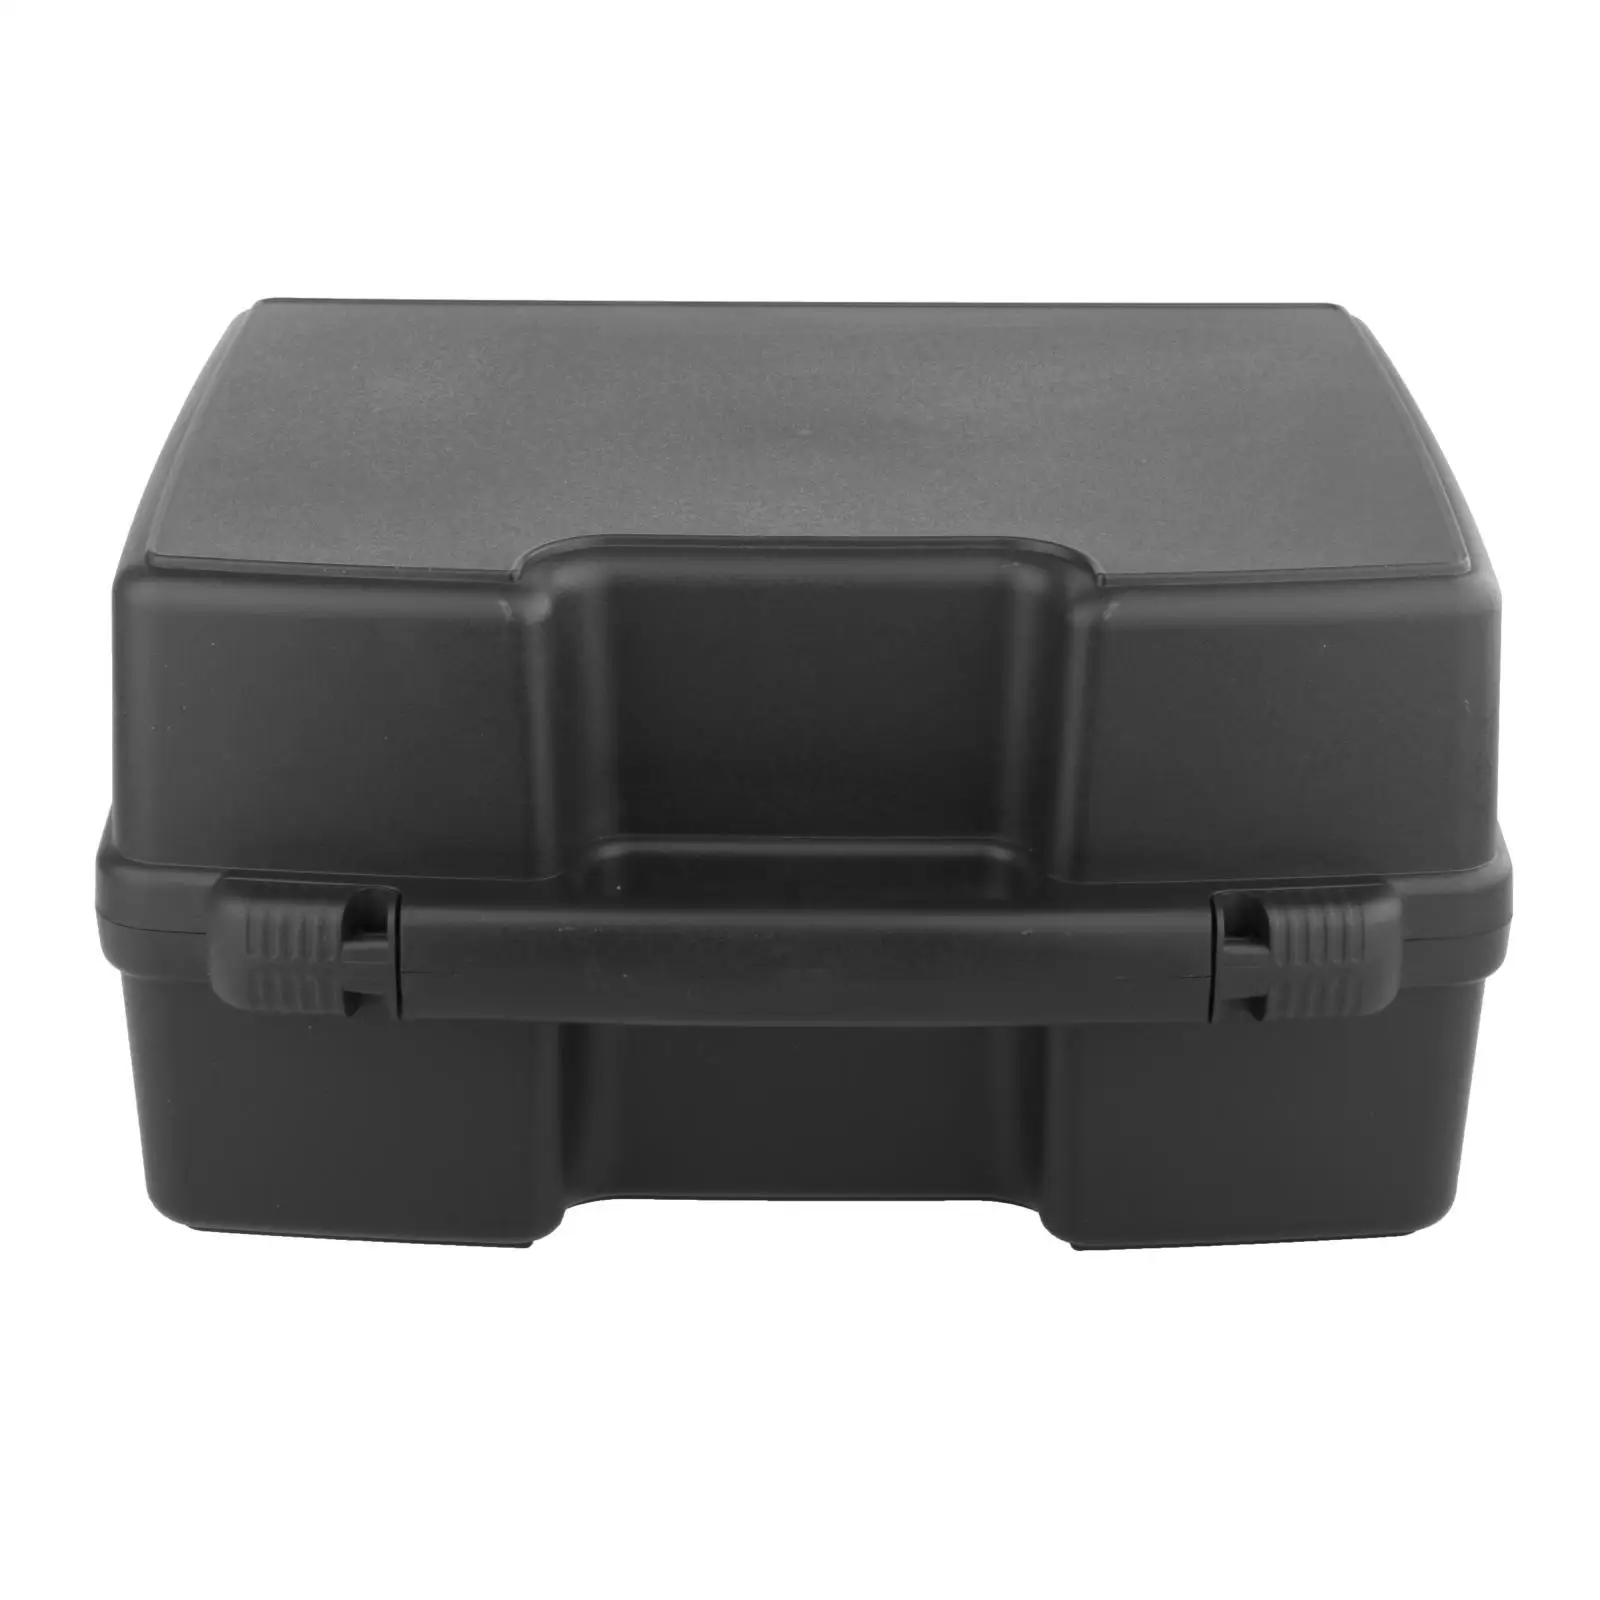 Universal Protect Toolbox Parts Storage Organiser Lightweight Watertight Anti Impact with Sponge Boxes Durable for Outdoor